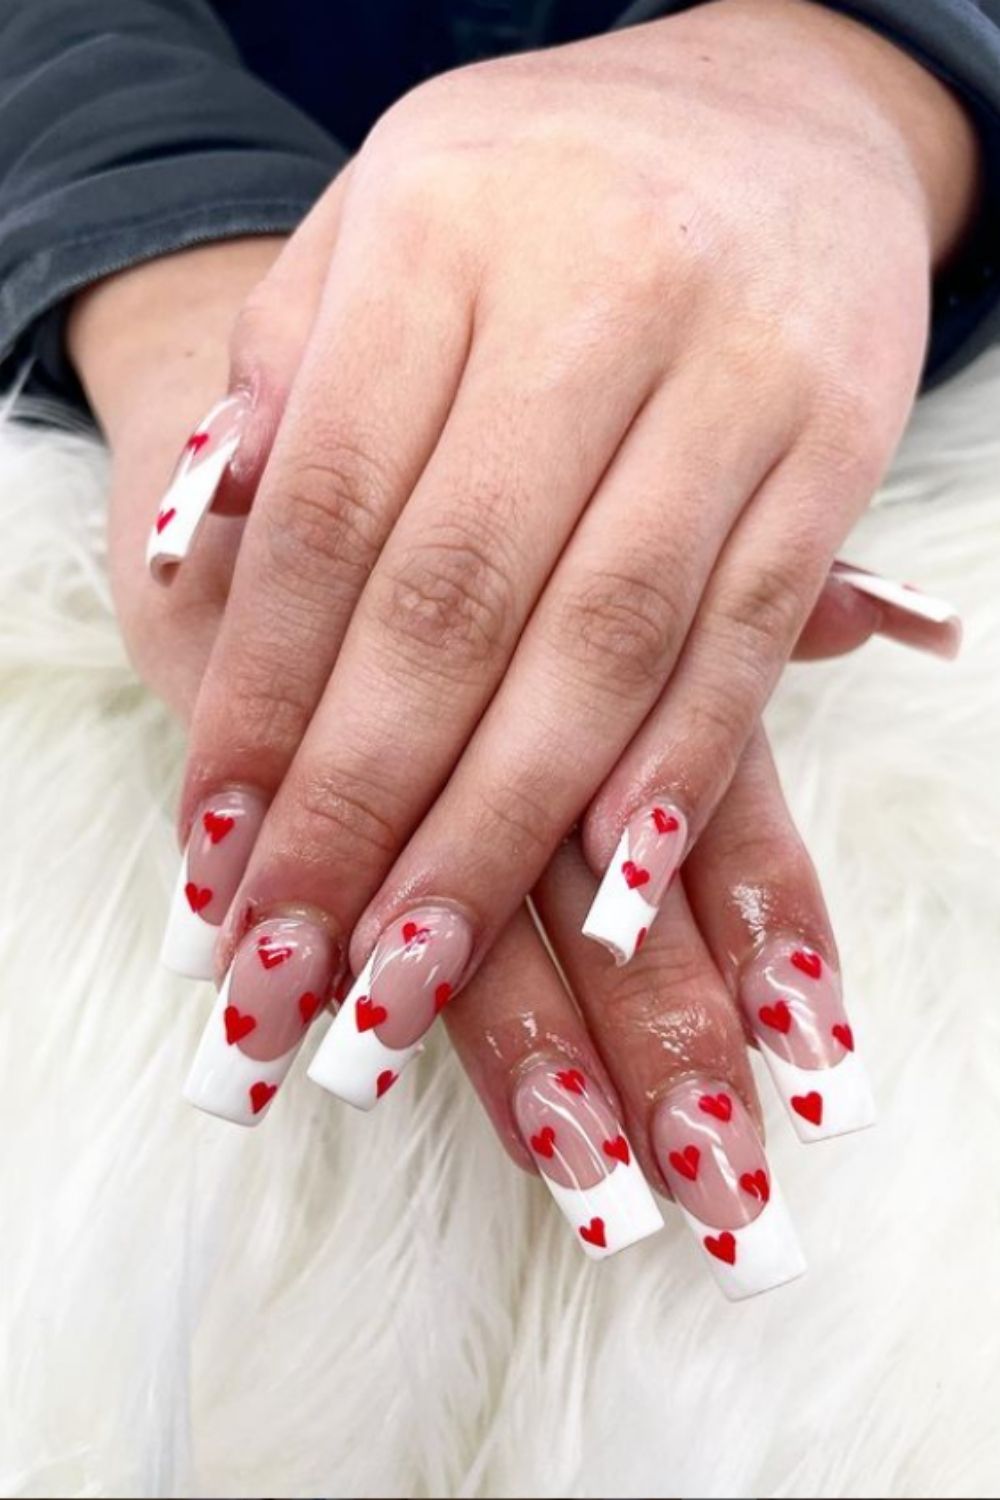 White tip coffin nails with small heart